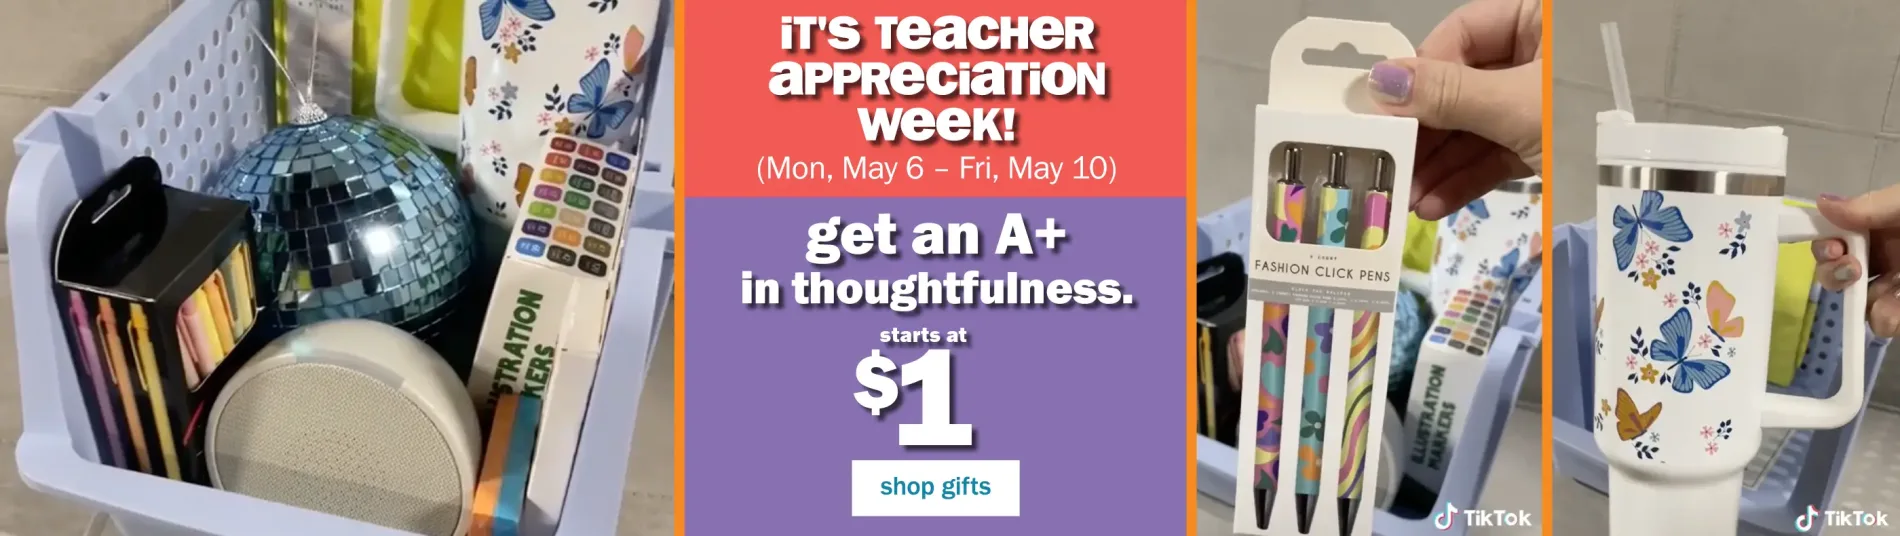 It's Teacher Appreciation Week! (Mon, May 6 - Fri, May 10) Get an A+ in Thoughtfulness. Starts at $1. Shop Gifts.